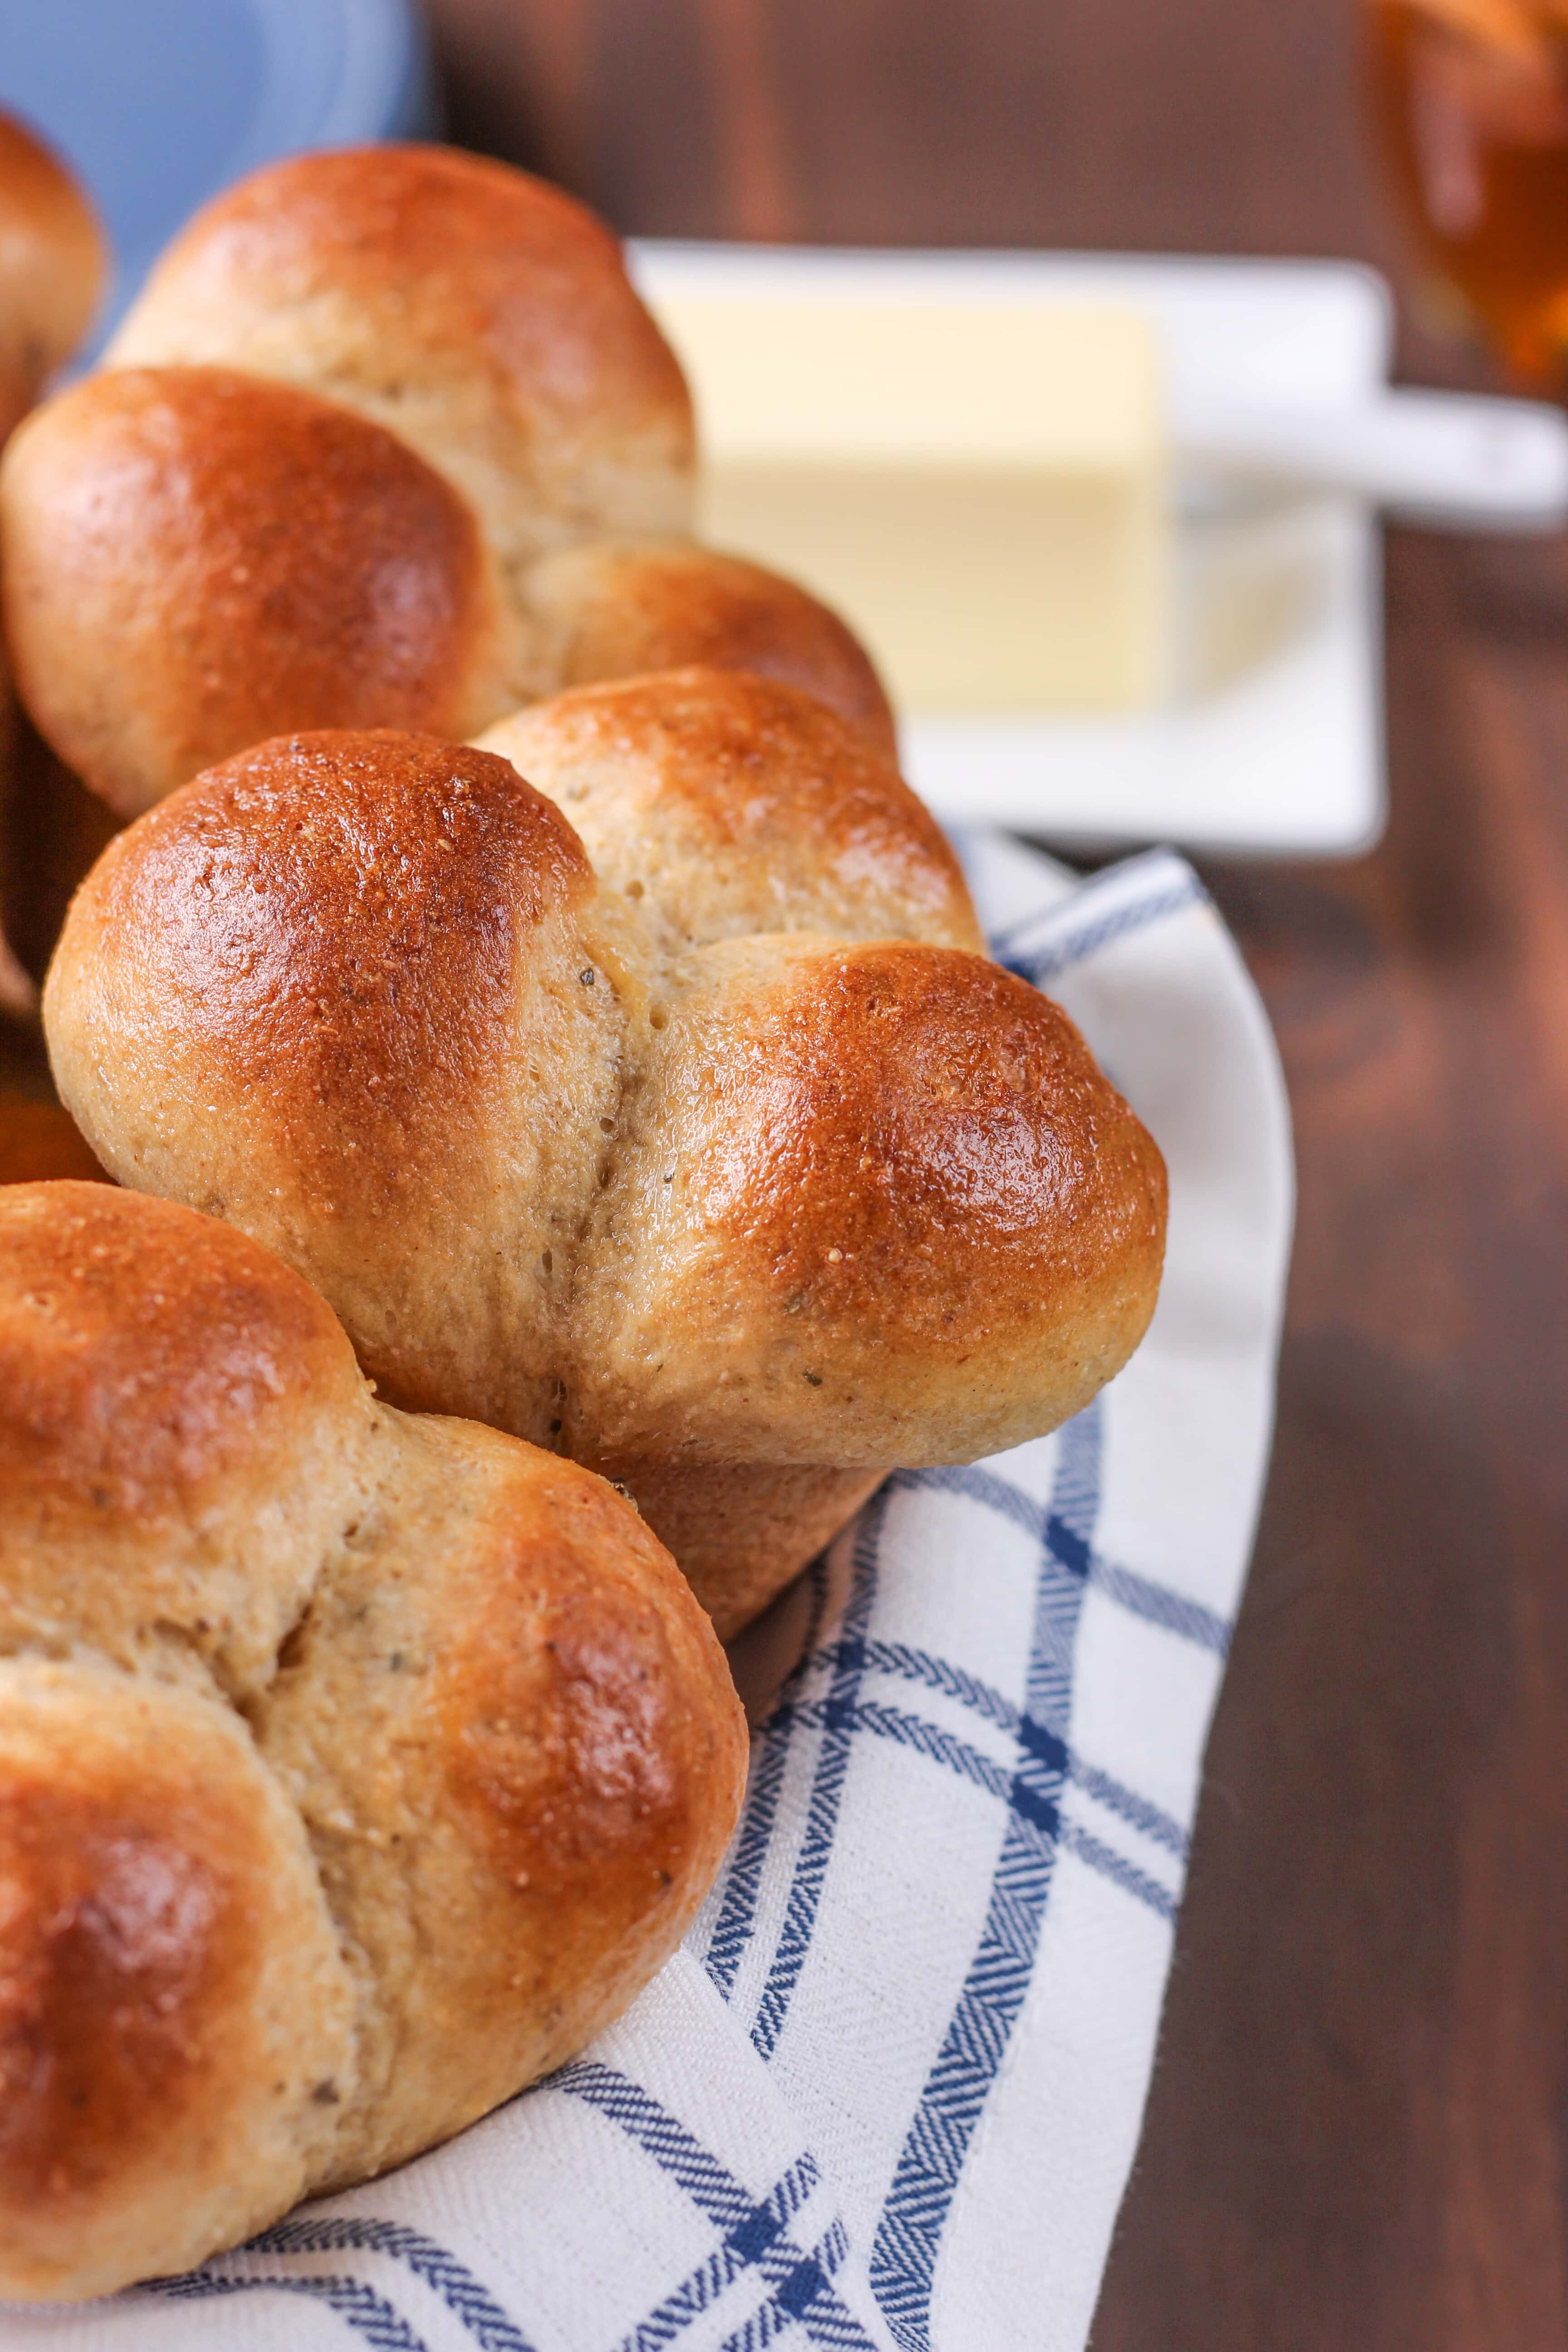 45 Minute Herbed Wheat Cloverleaf Rolls Recipe from A Kitchen Addiction